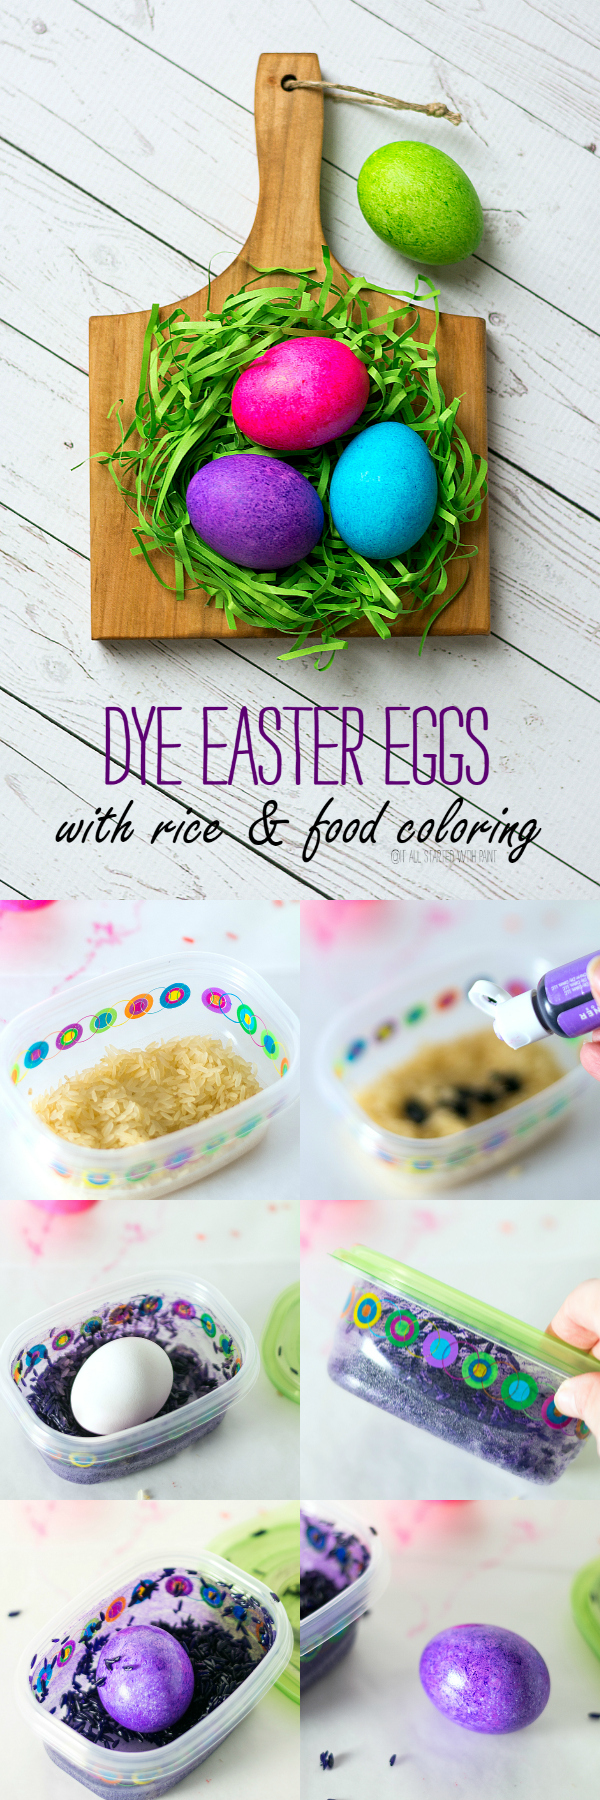 How To Color Easter Eggs with Food Coloring